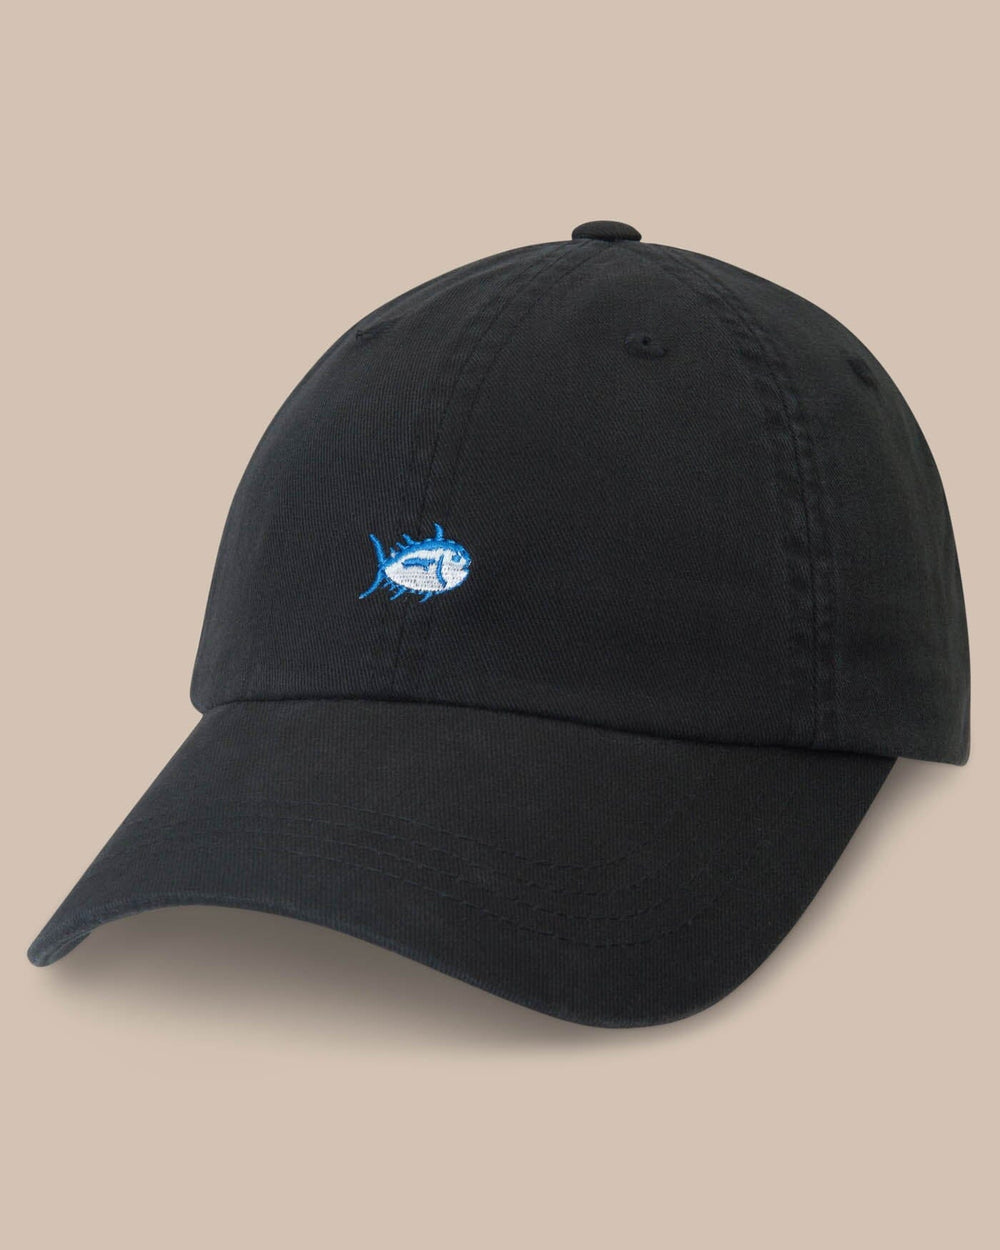 The front of the Skipjack Hat by Southern Tide - Black